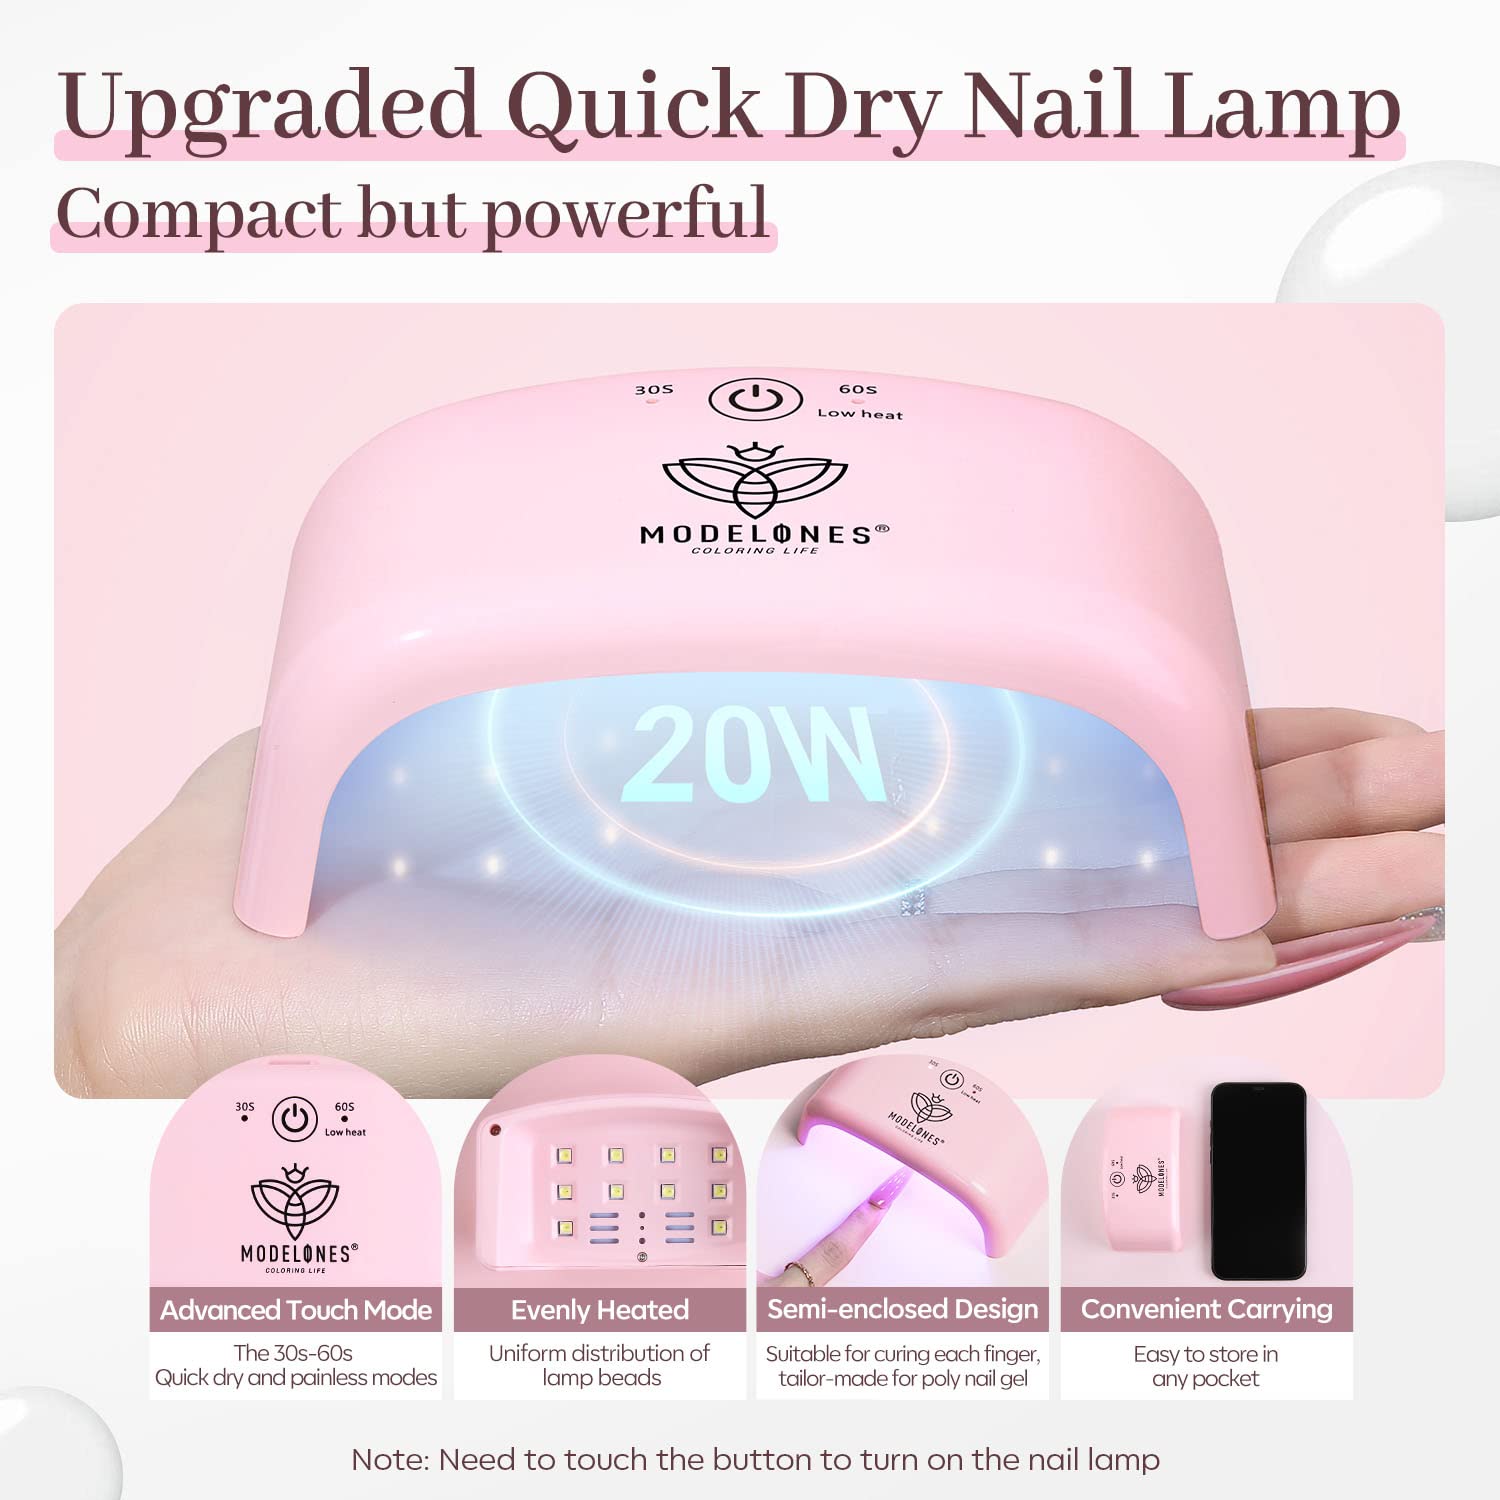 Love Spell - 6 Colors Poly Nail Gel Kit【US ONLY】